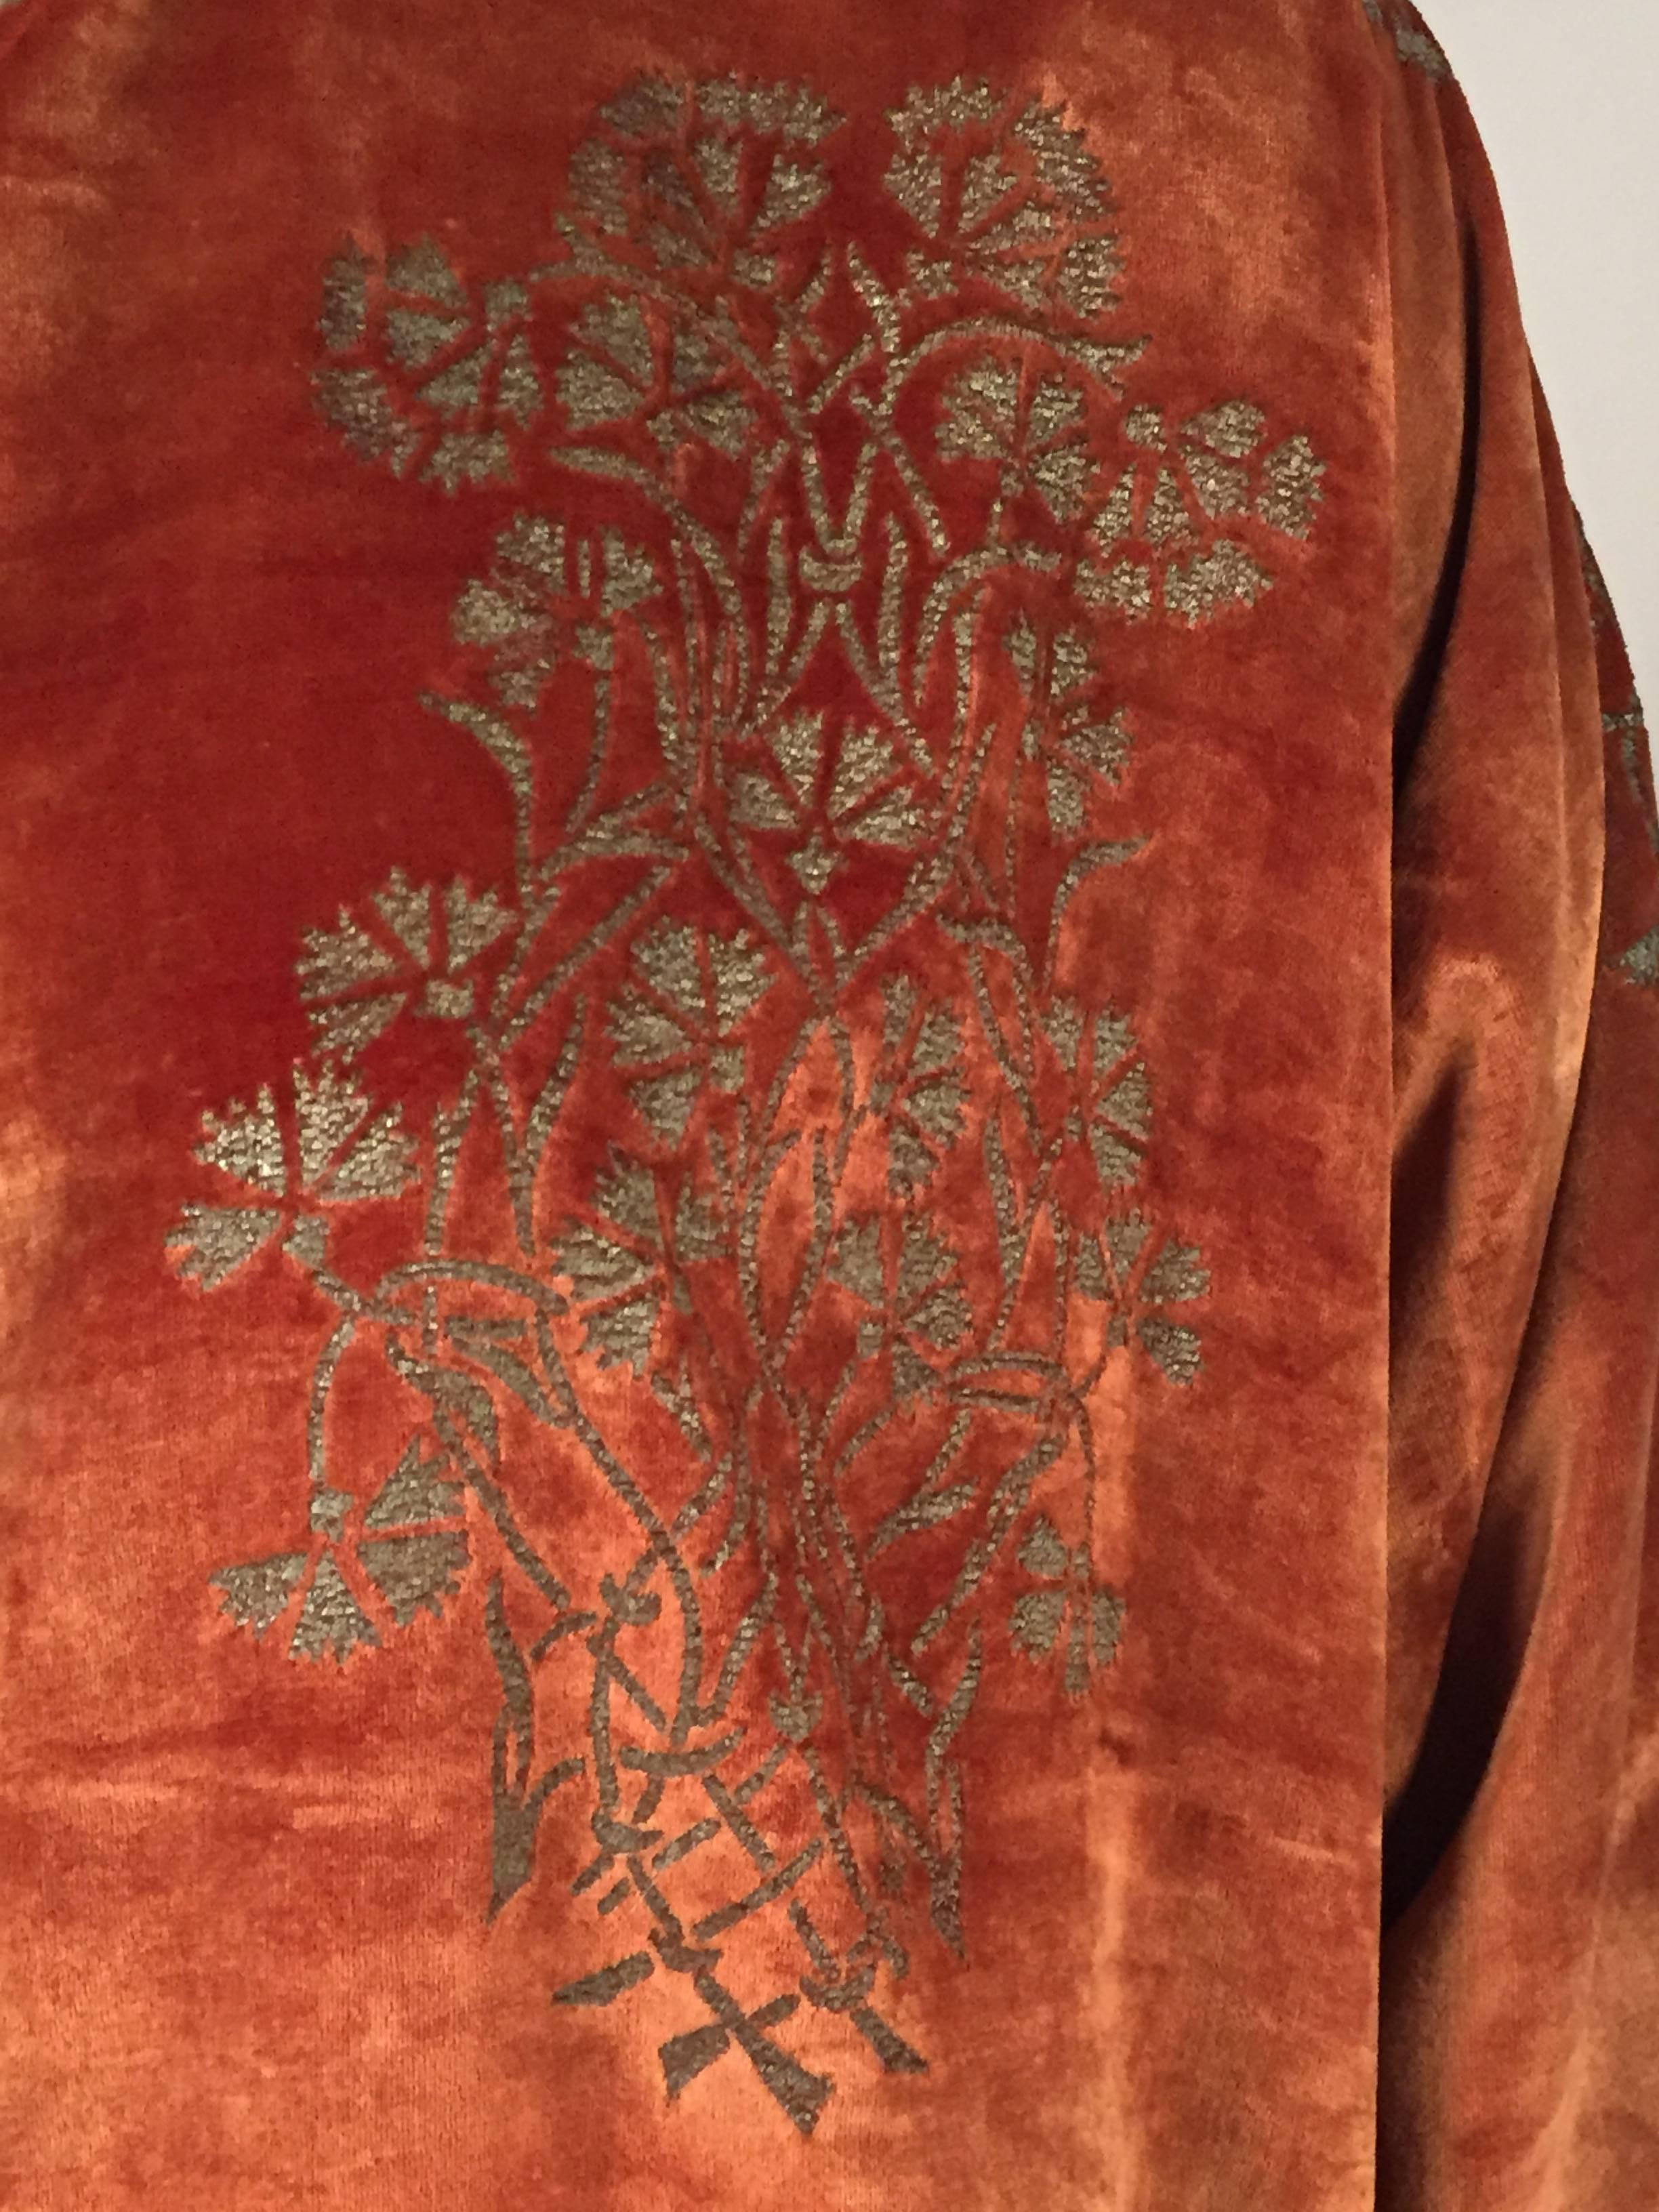 The Holy Grail for any collector of vintage clothing is a hand stenciled velvet coat from Mariano Fortuny. These rare pieces were hand made and hand decorated in Venice, and they are even harder to find than the iconic pleated Delphos dress. An